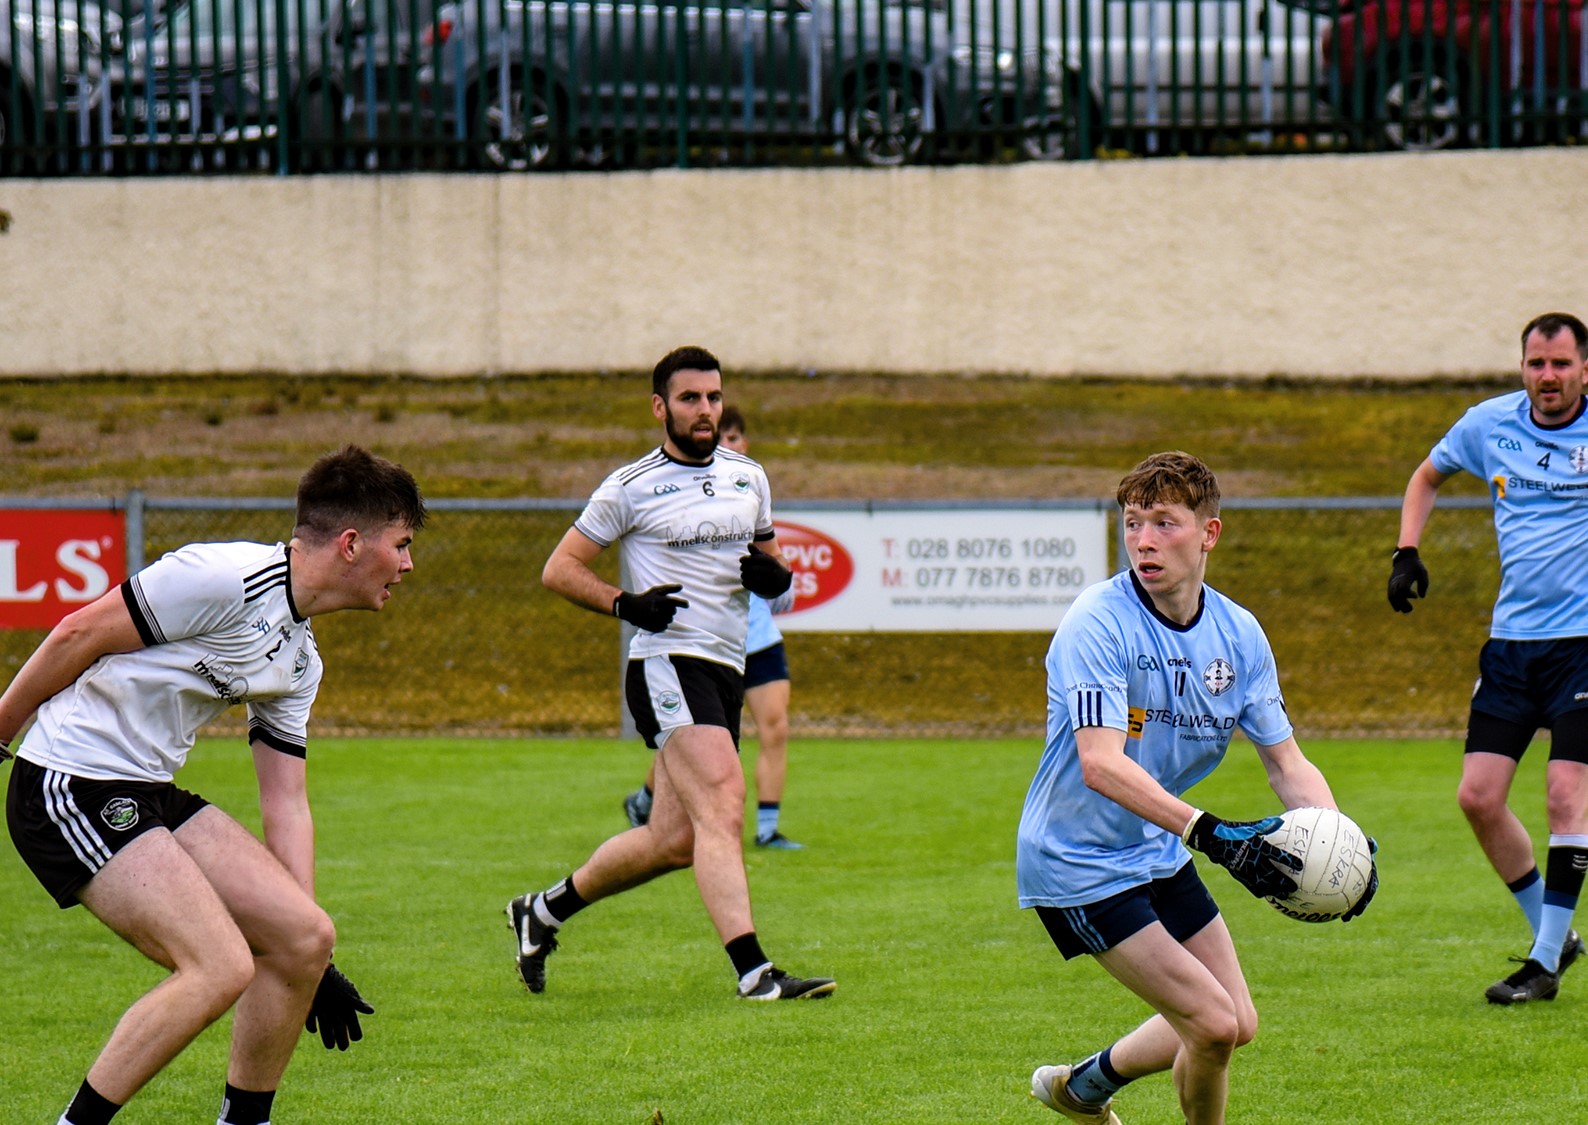 Eskra give the favourites Cookstown a fright